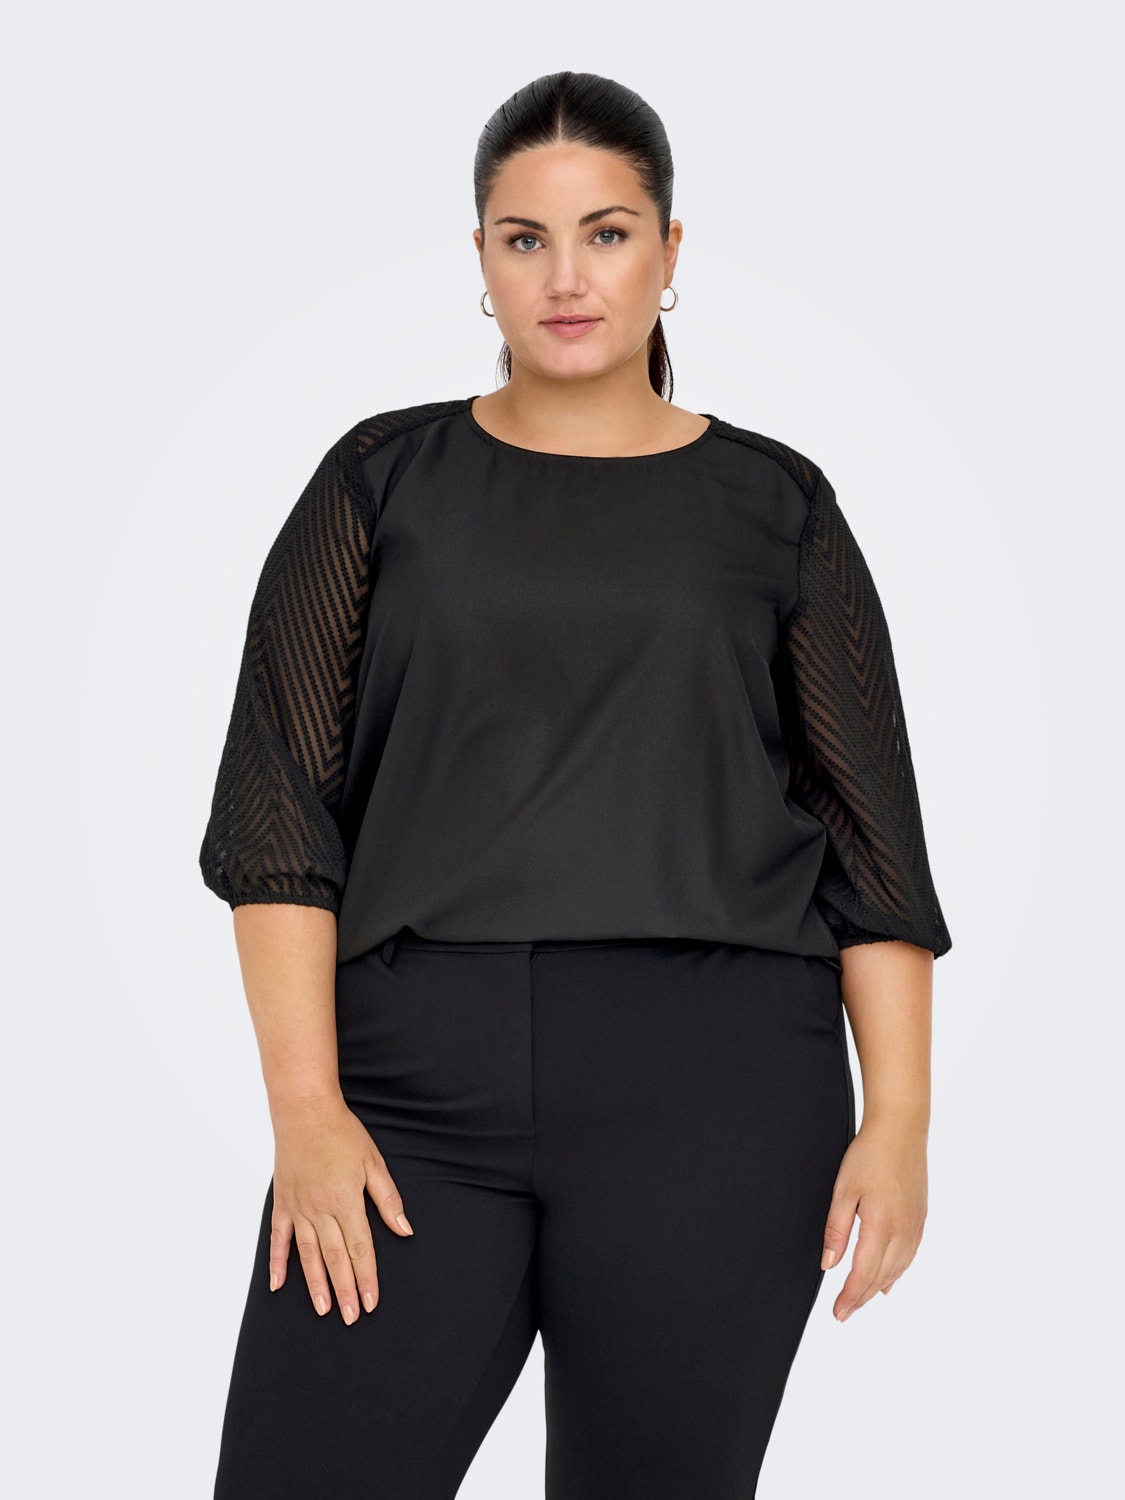 ONLY Curvy top with 3/4 sleeves -Black - 15302926